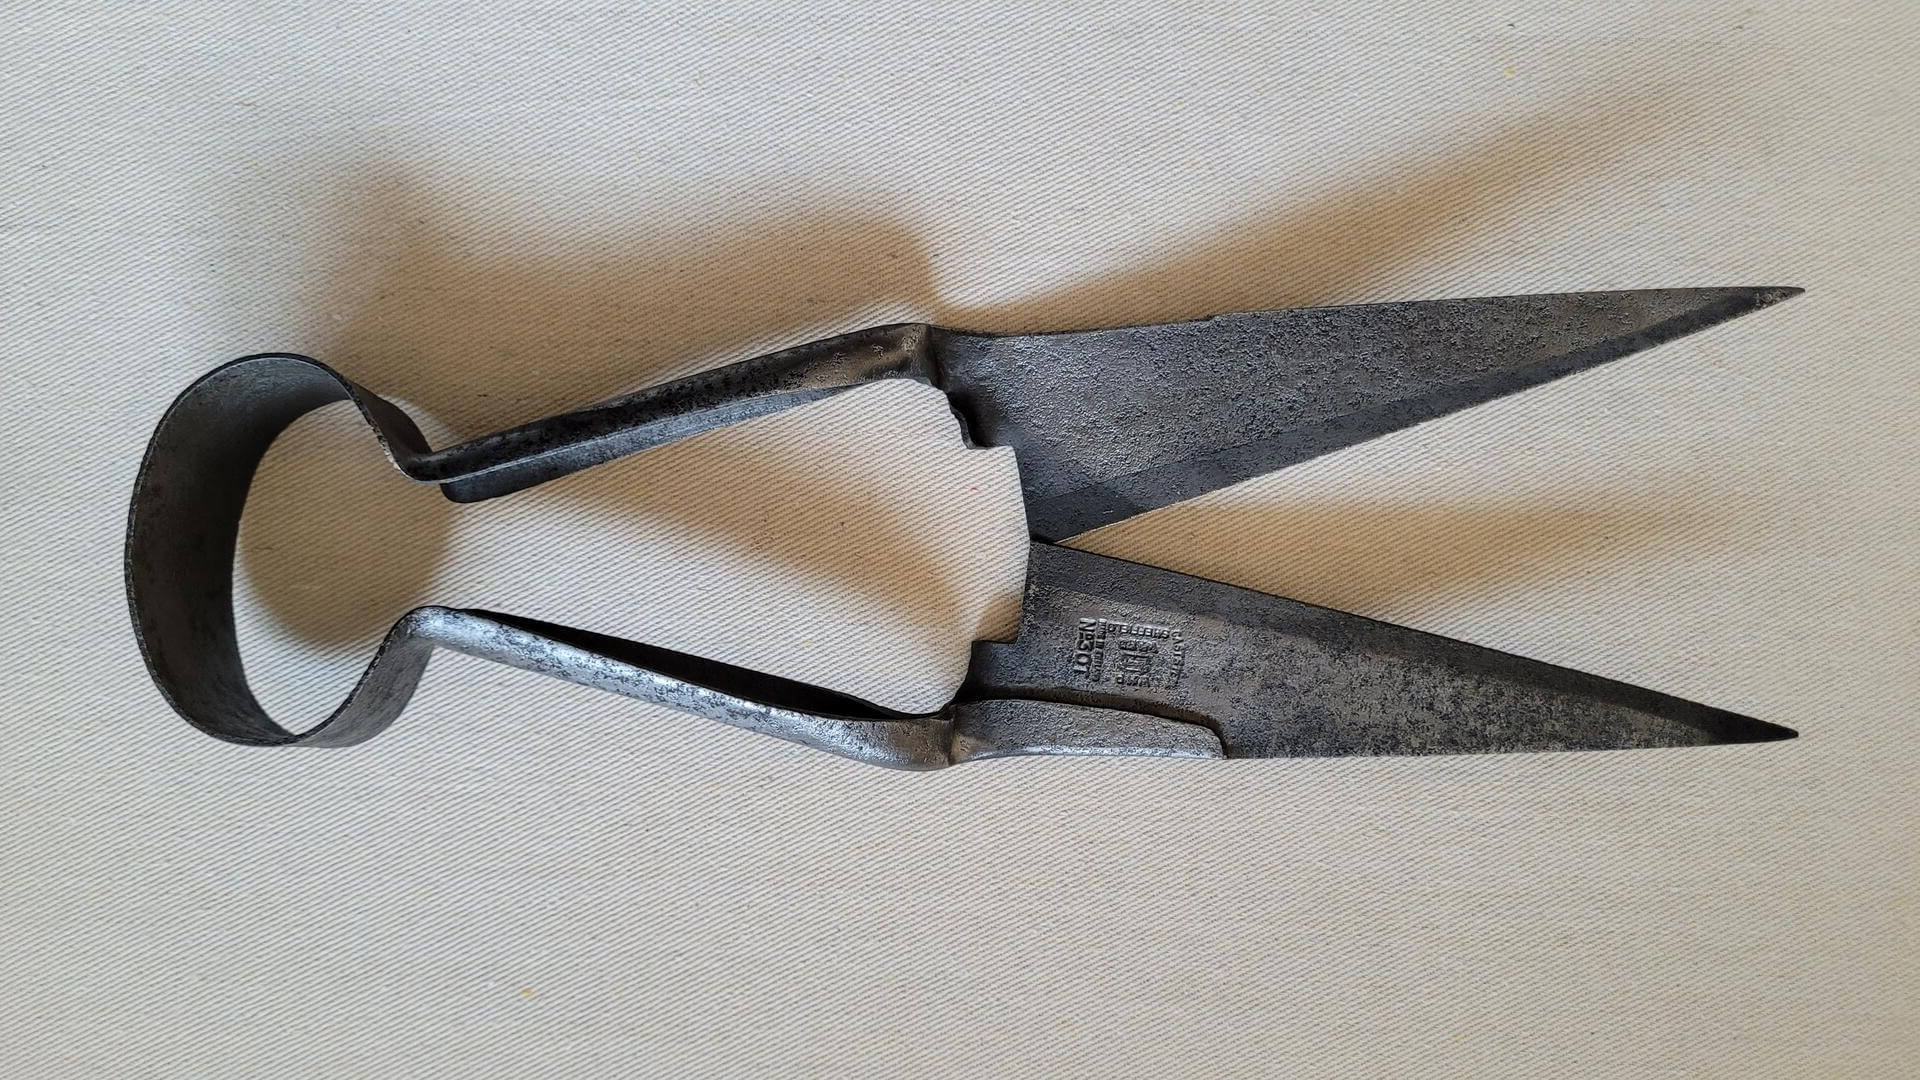 Antique steel Ward No 30 sheep shears. Vintage made in Sheffield England collectible primitive farm tools, livestock trimming scissors and hand clippers